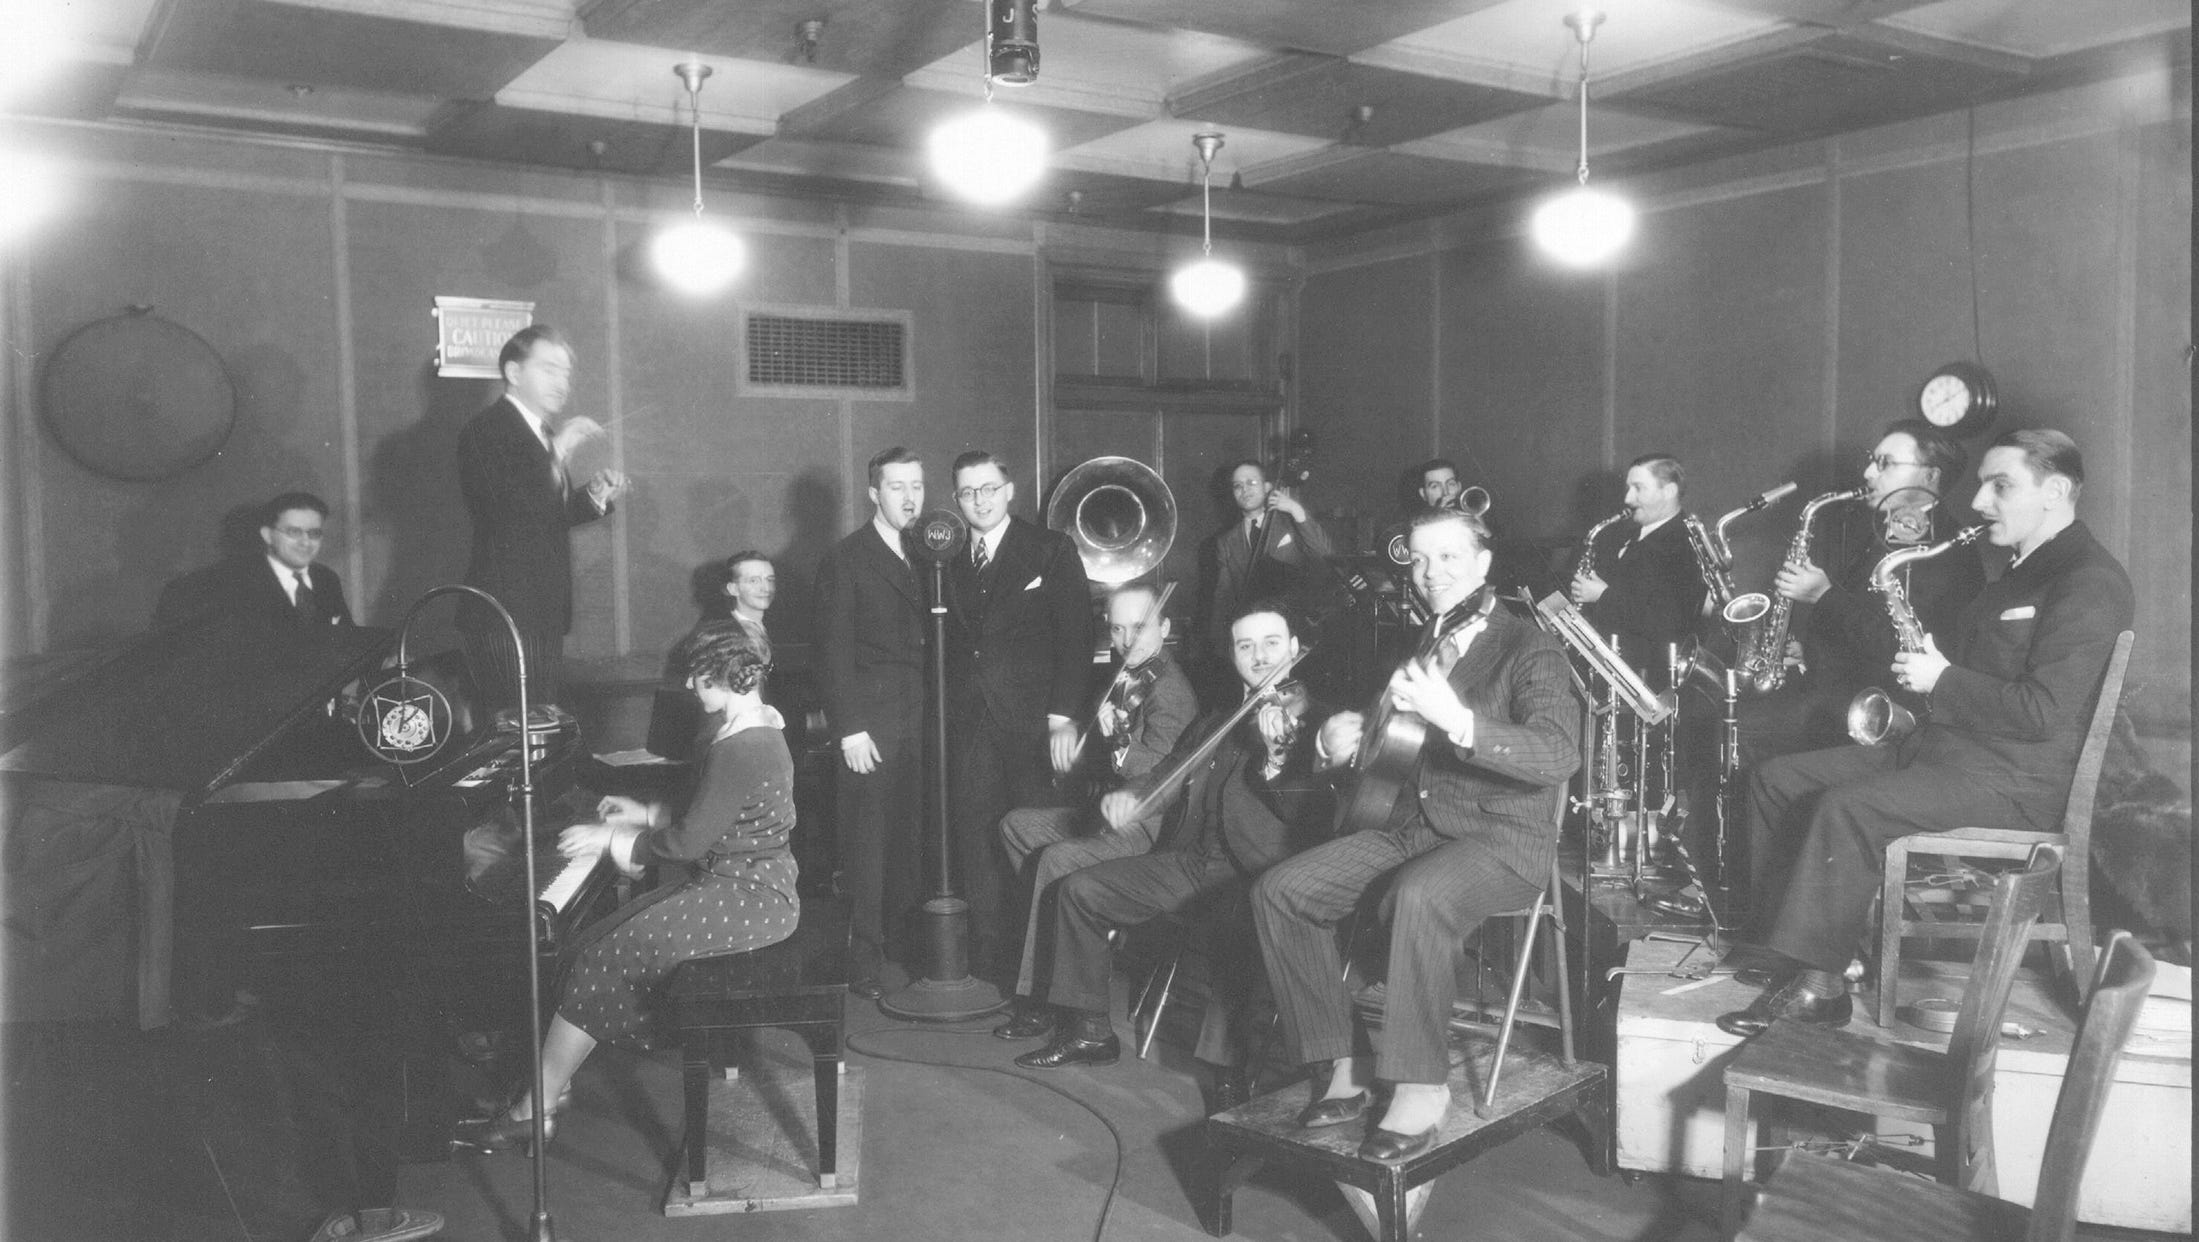 The studio orchestra is in full swing in 1931.